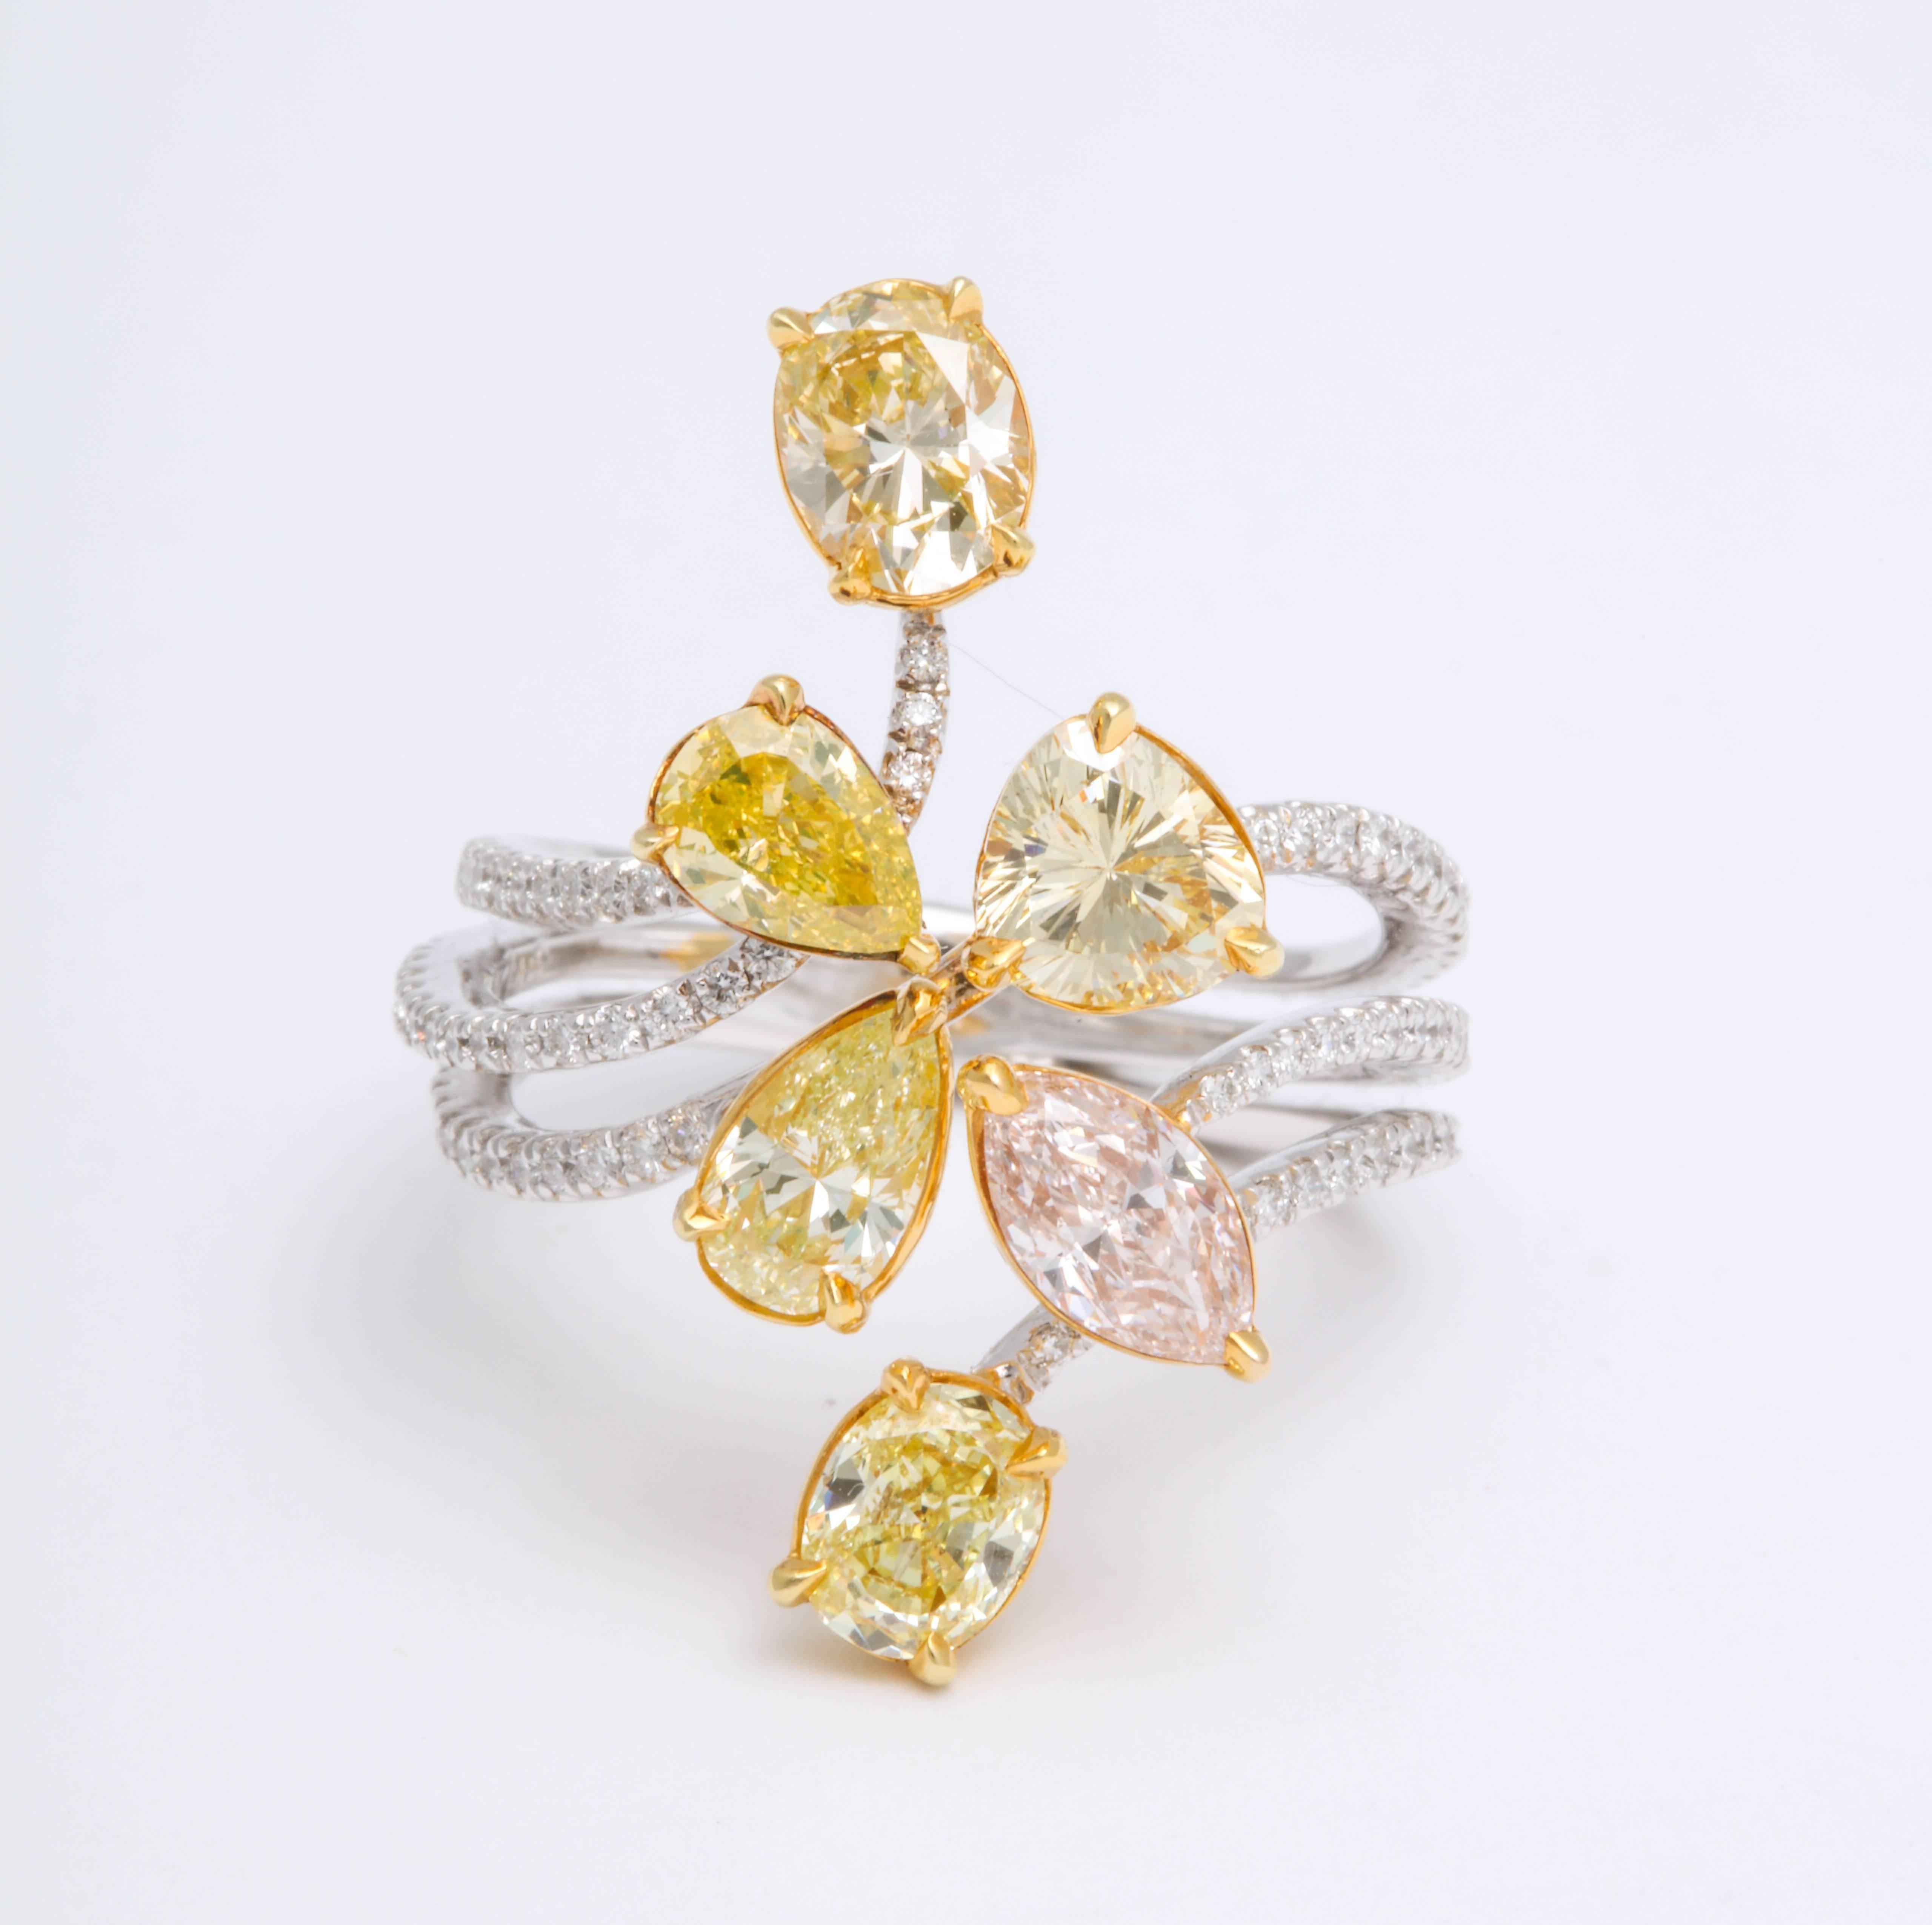 Modern 18 Karat White Gold and Yellow Gold Multi-Color Diamond Cluster Cocktail Ring